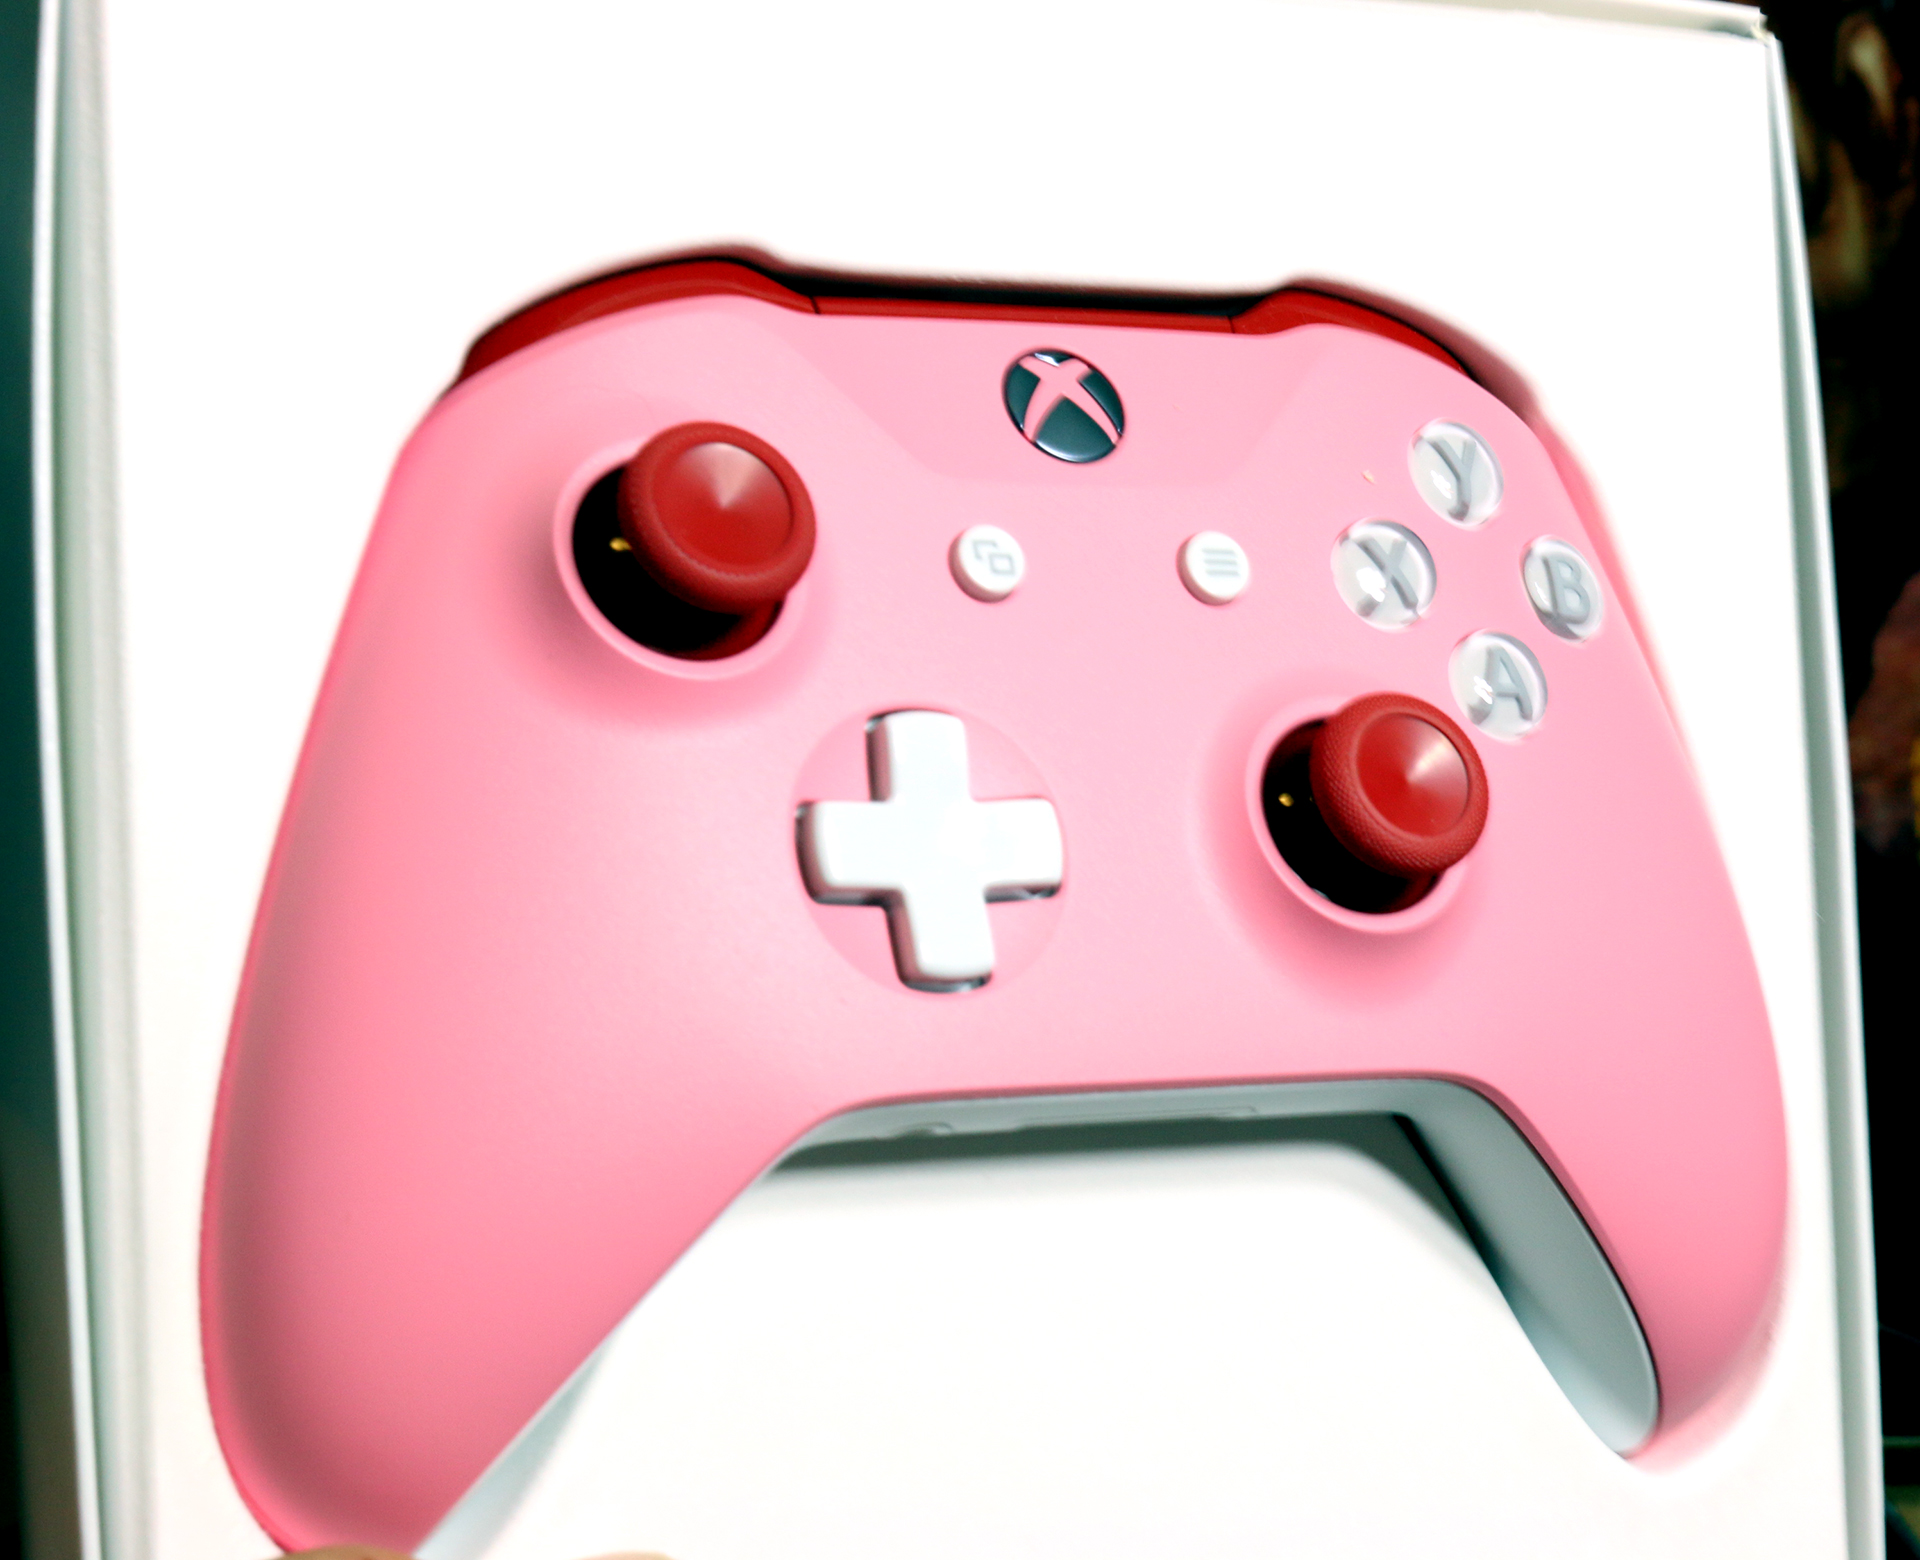 It’s Hard To Make The Official Xbox One Custom Controllers Look Bad